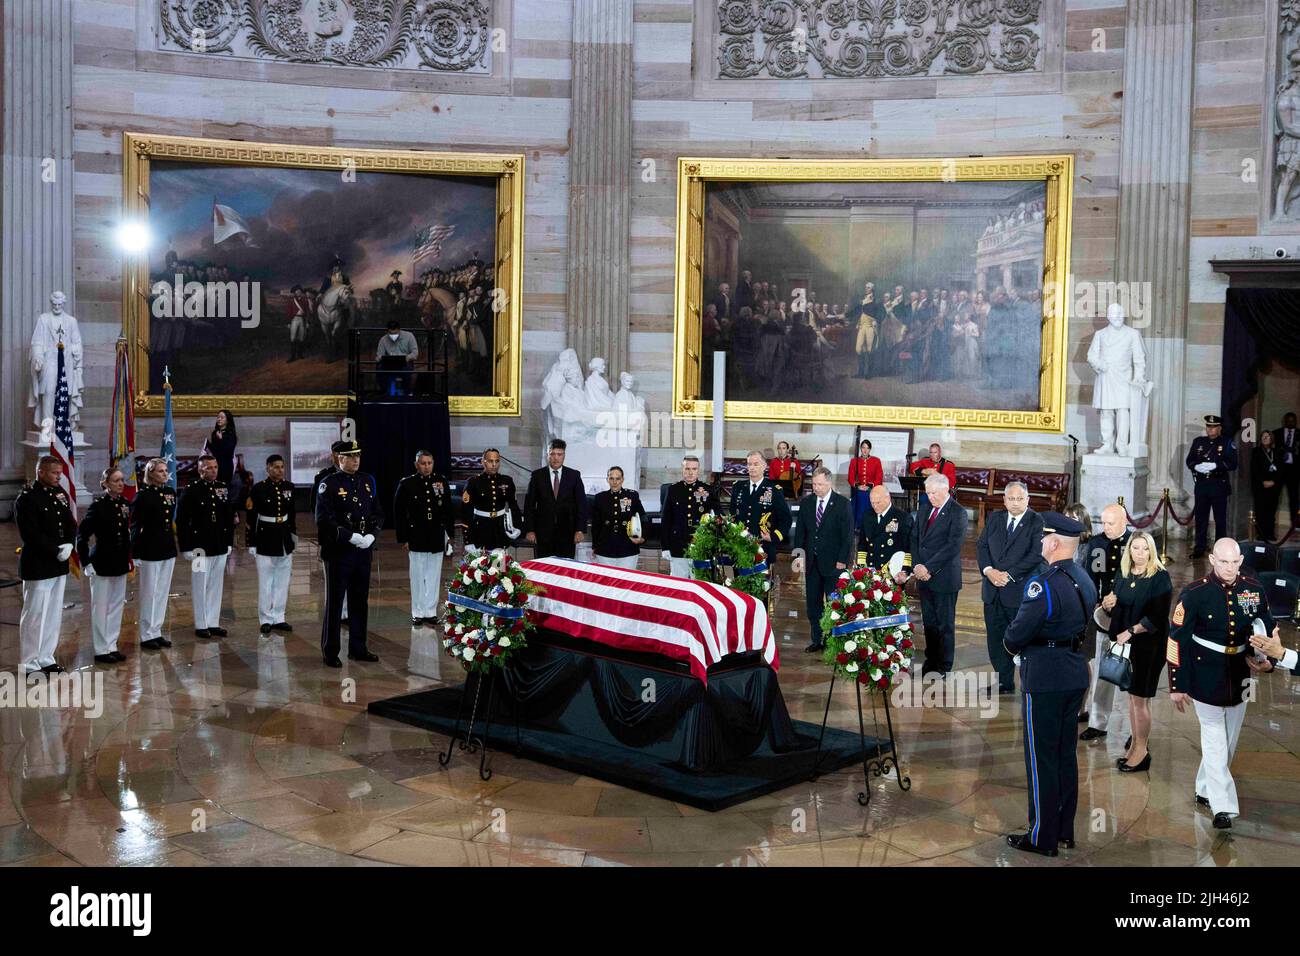 Washington DC, USA. 14th July, 2022. Members of the Marine Corps and others pay respects to Hershel Woodrow “Woody” Williams, the last Medal of Honor recipient of World War II to pass away, in the U.S. Capitol Rotunda as his remains lie in honor in Washington, DC, USA, on Thursday, July 14, 2022. Williams, who passed away at age 98, received the award for action in the Battle of Iwo Jima. Photo by Tom Williams/Pool/ABACAPRESS.COM Credit: Abaca Press/Alamy Live News Stock Photo